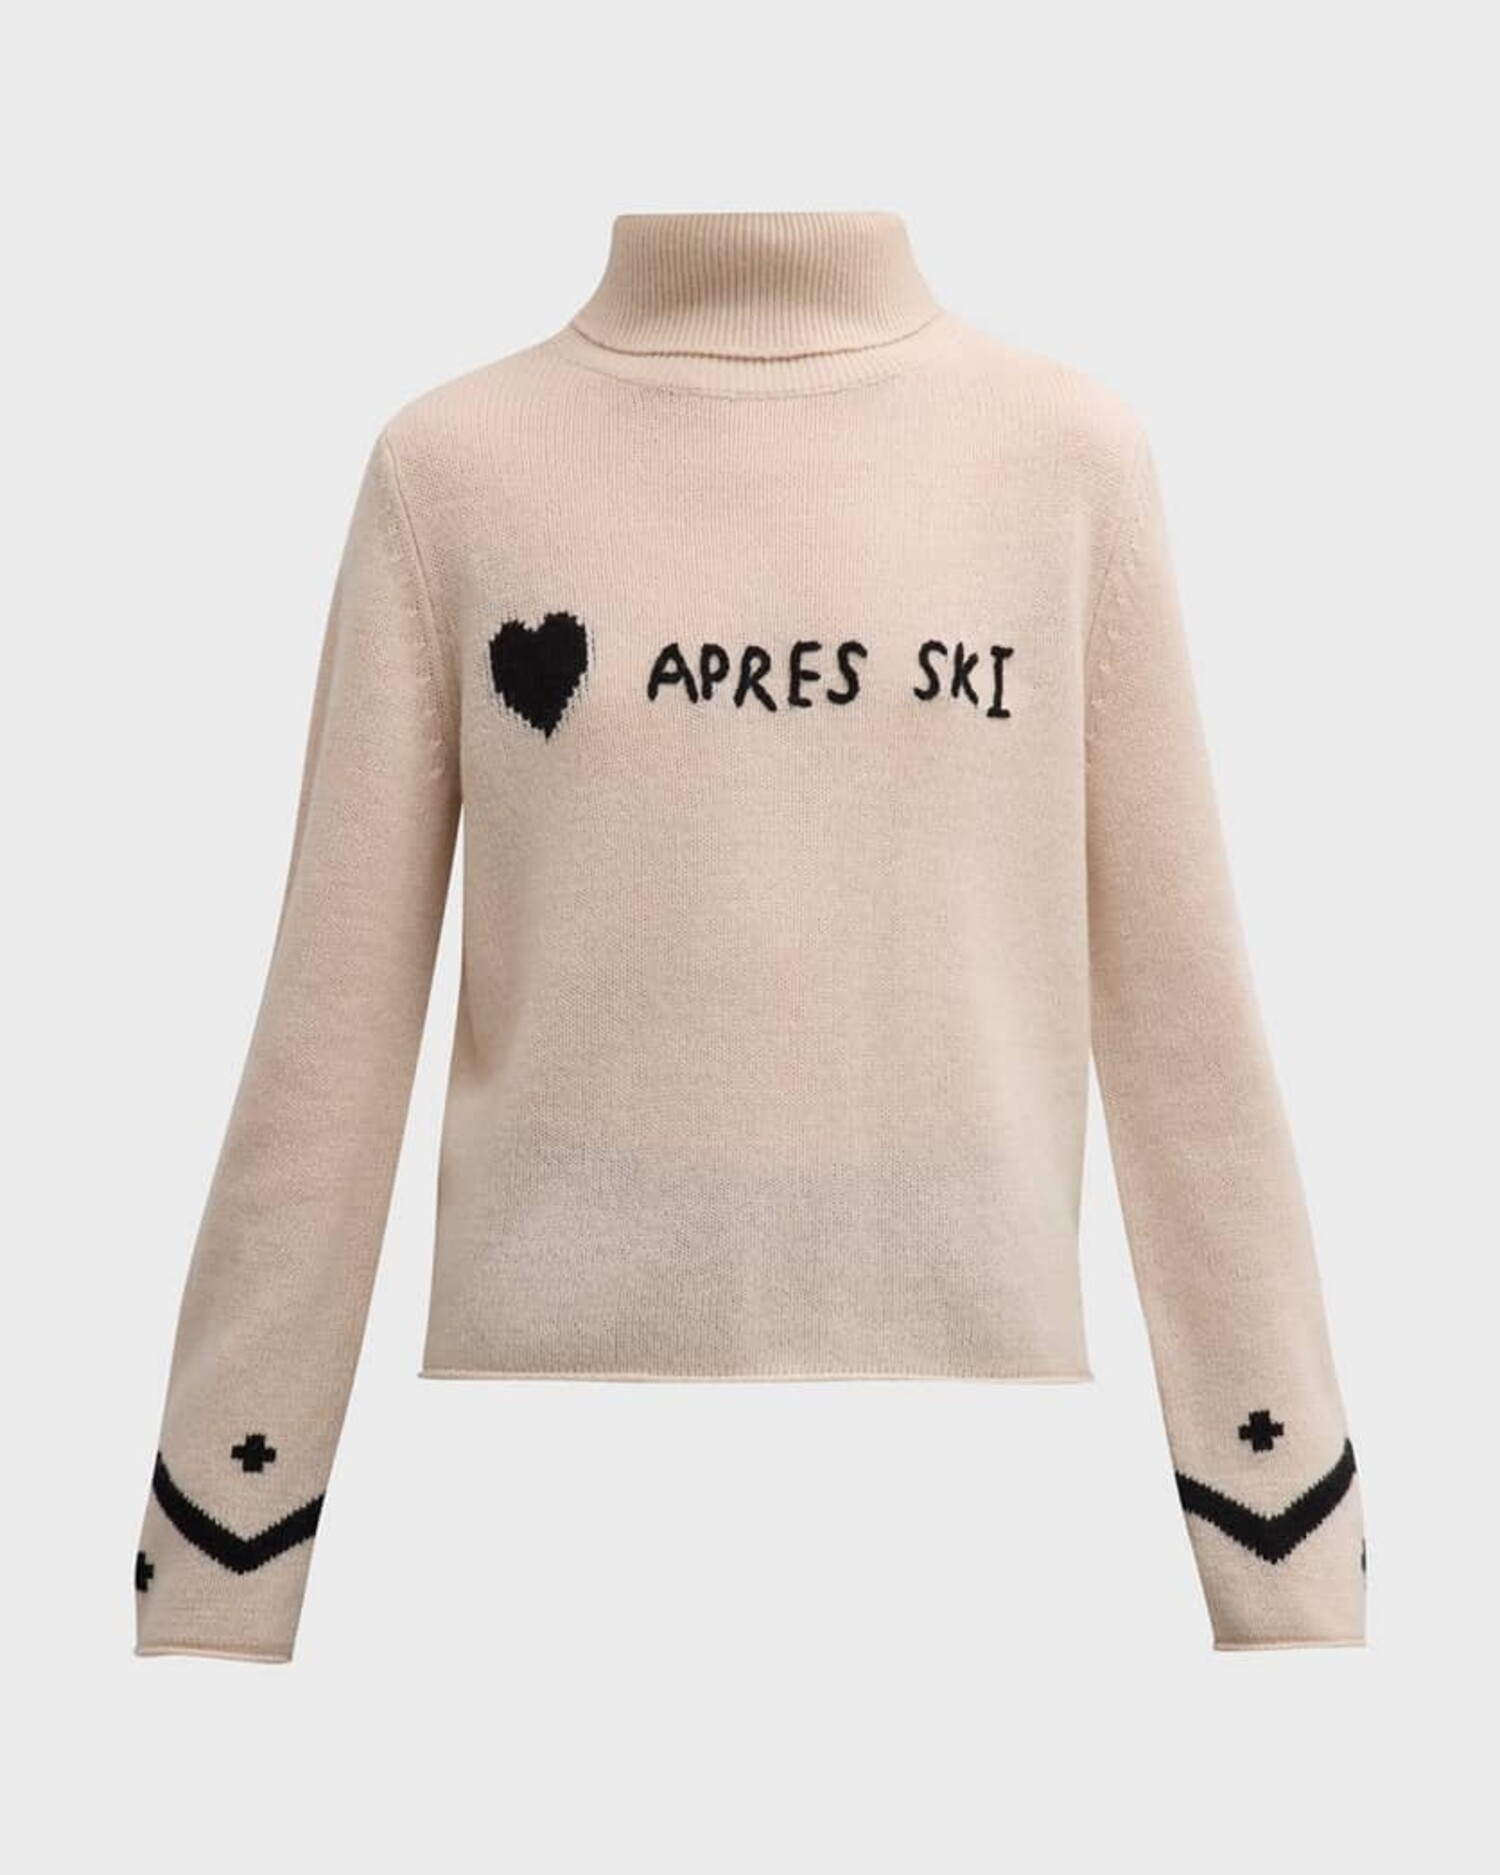 Apres Ski Sweater That You'll Wear Forever – Closetful of Clothes